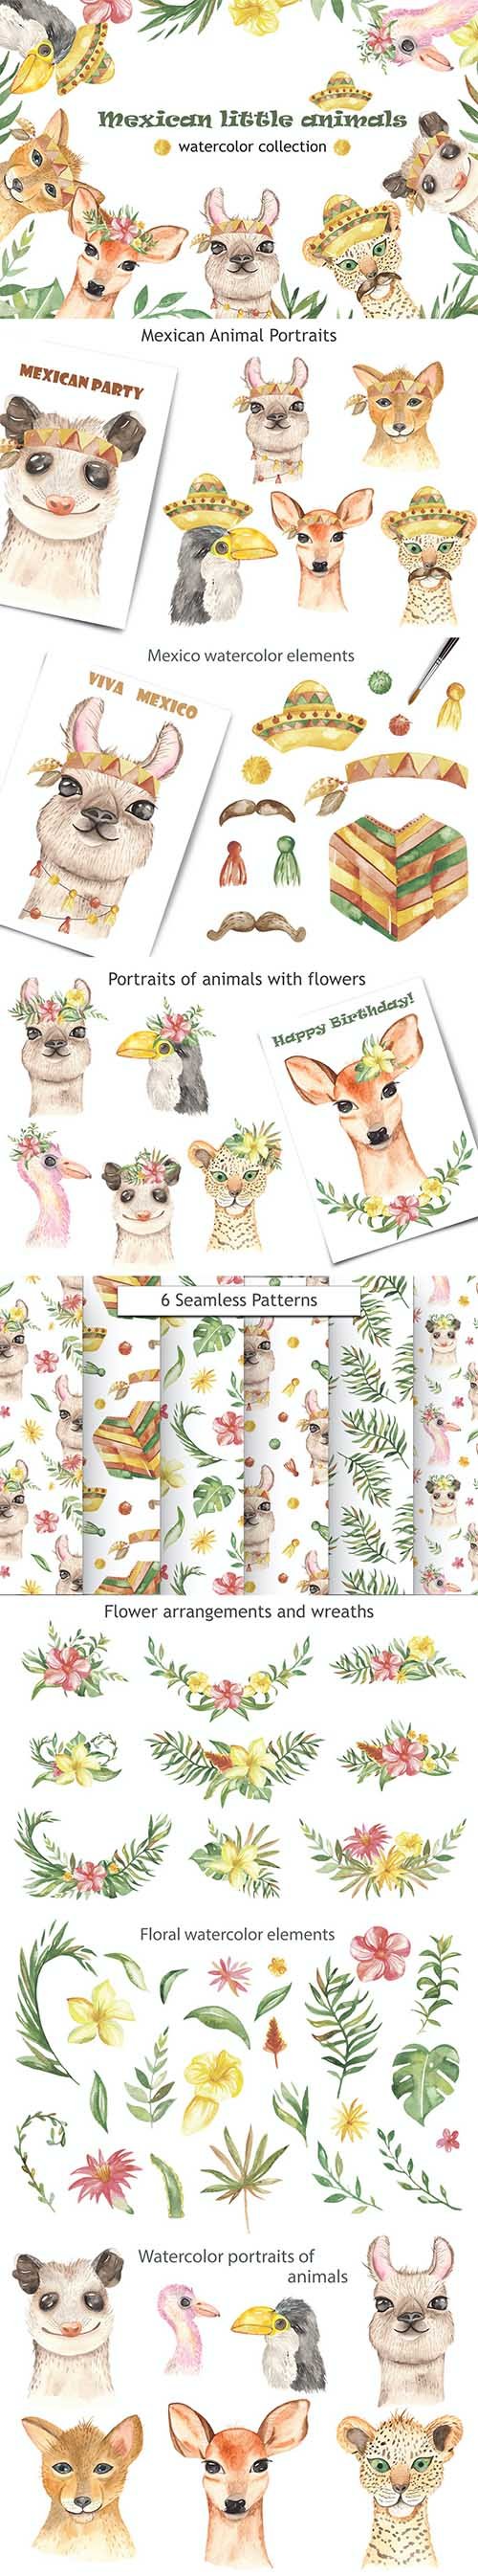 Watercolor Mexican little animals